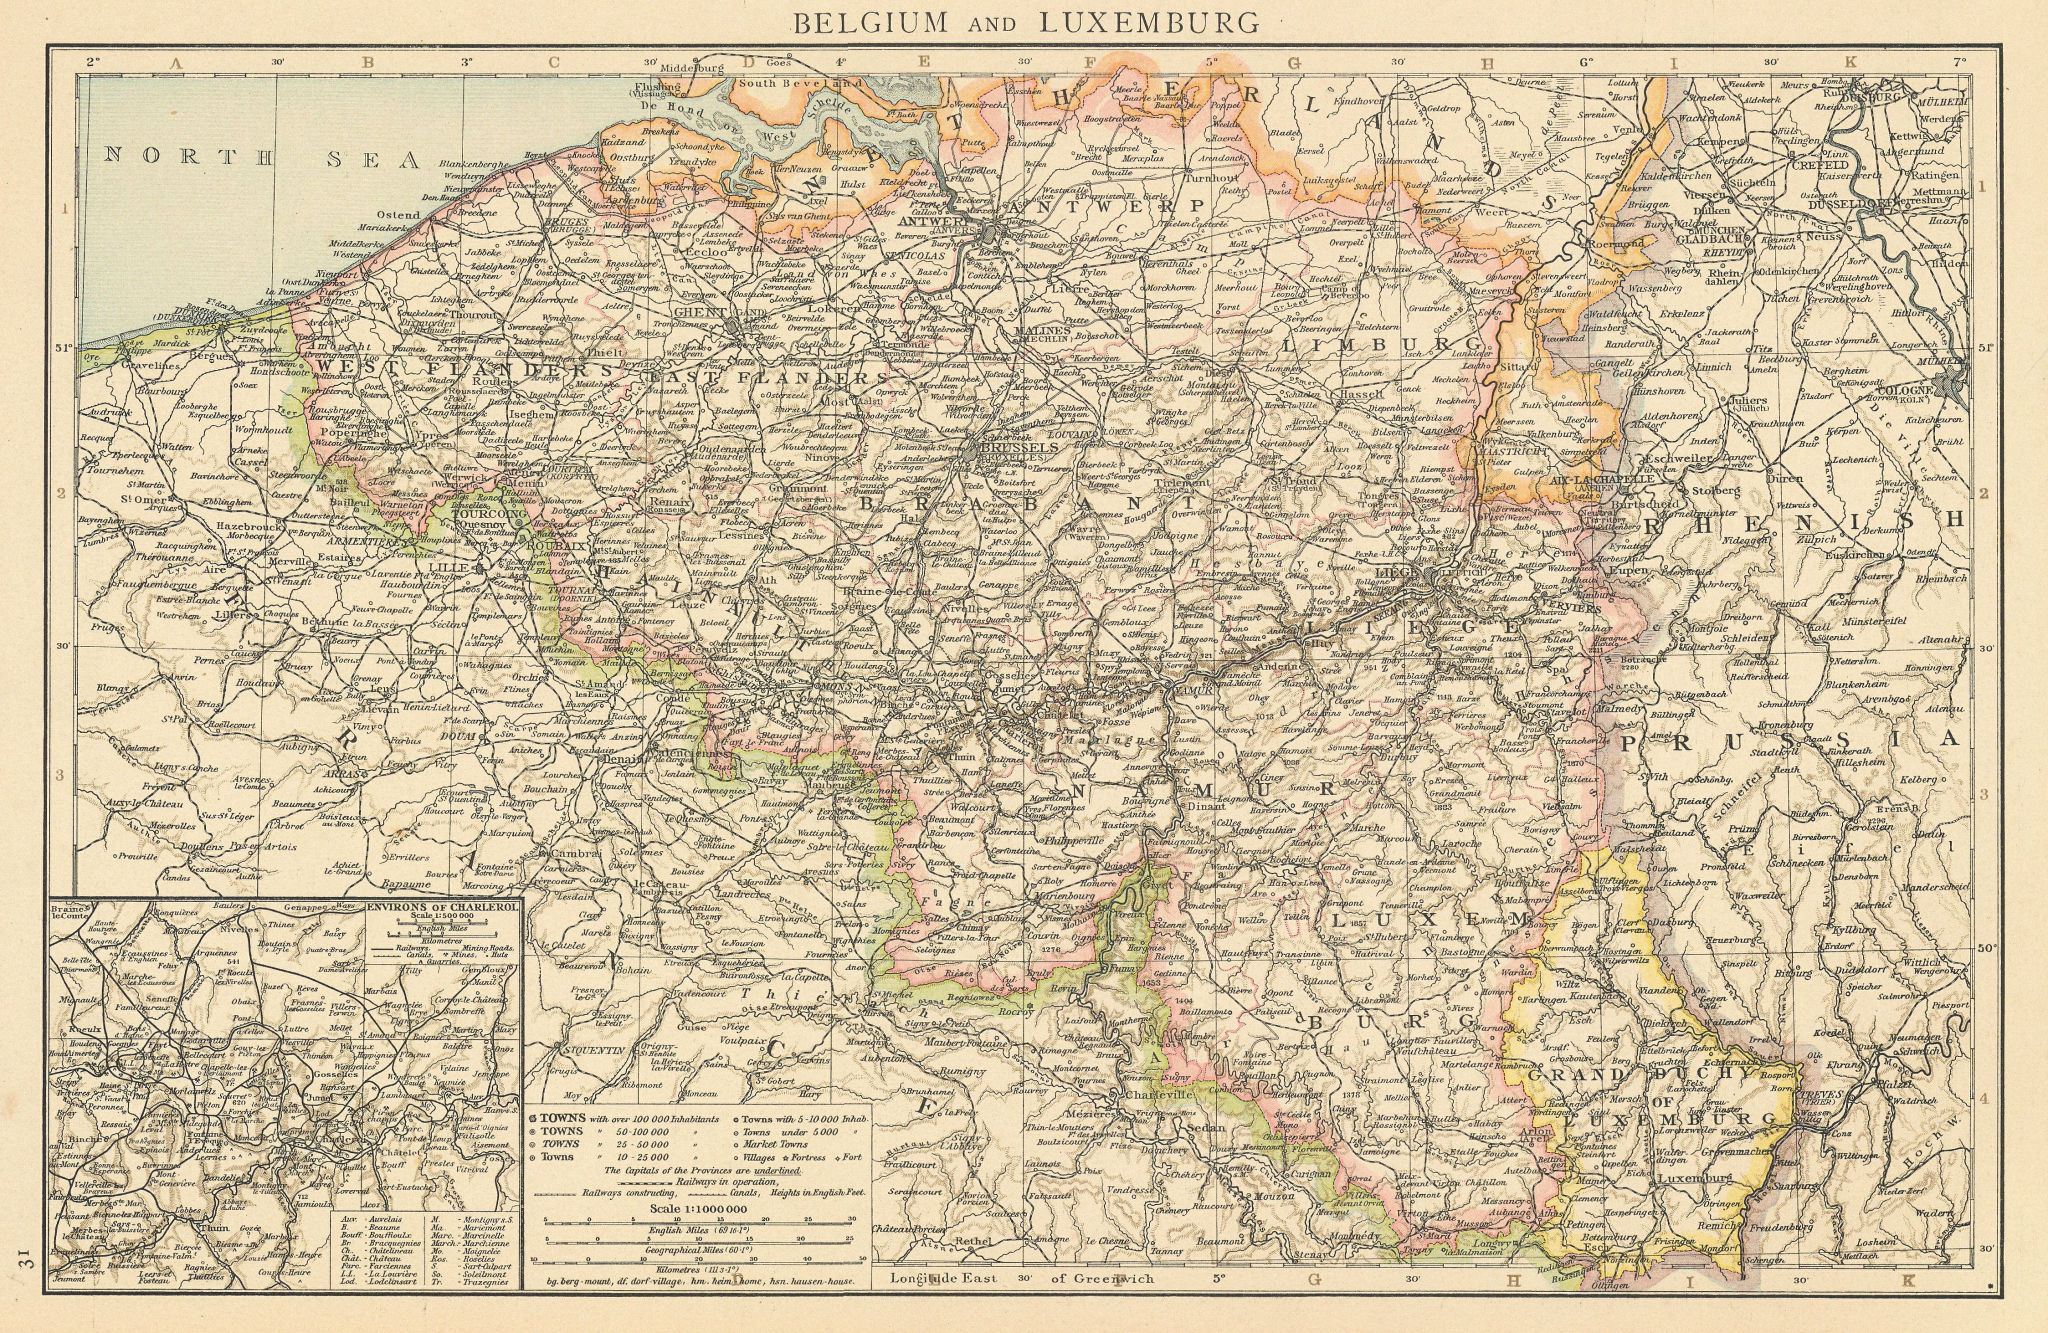 Associate Product Belgium and Luxemburg. Environs of Charleroi. THE TIMES 1895 old antique map